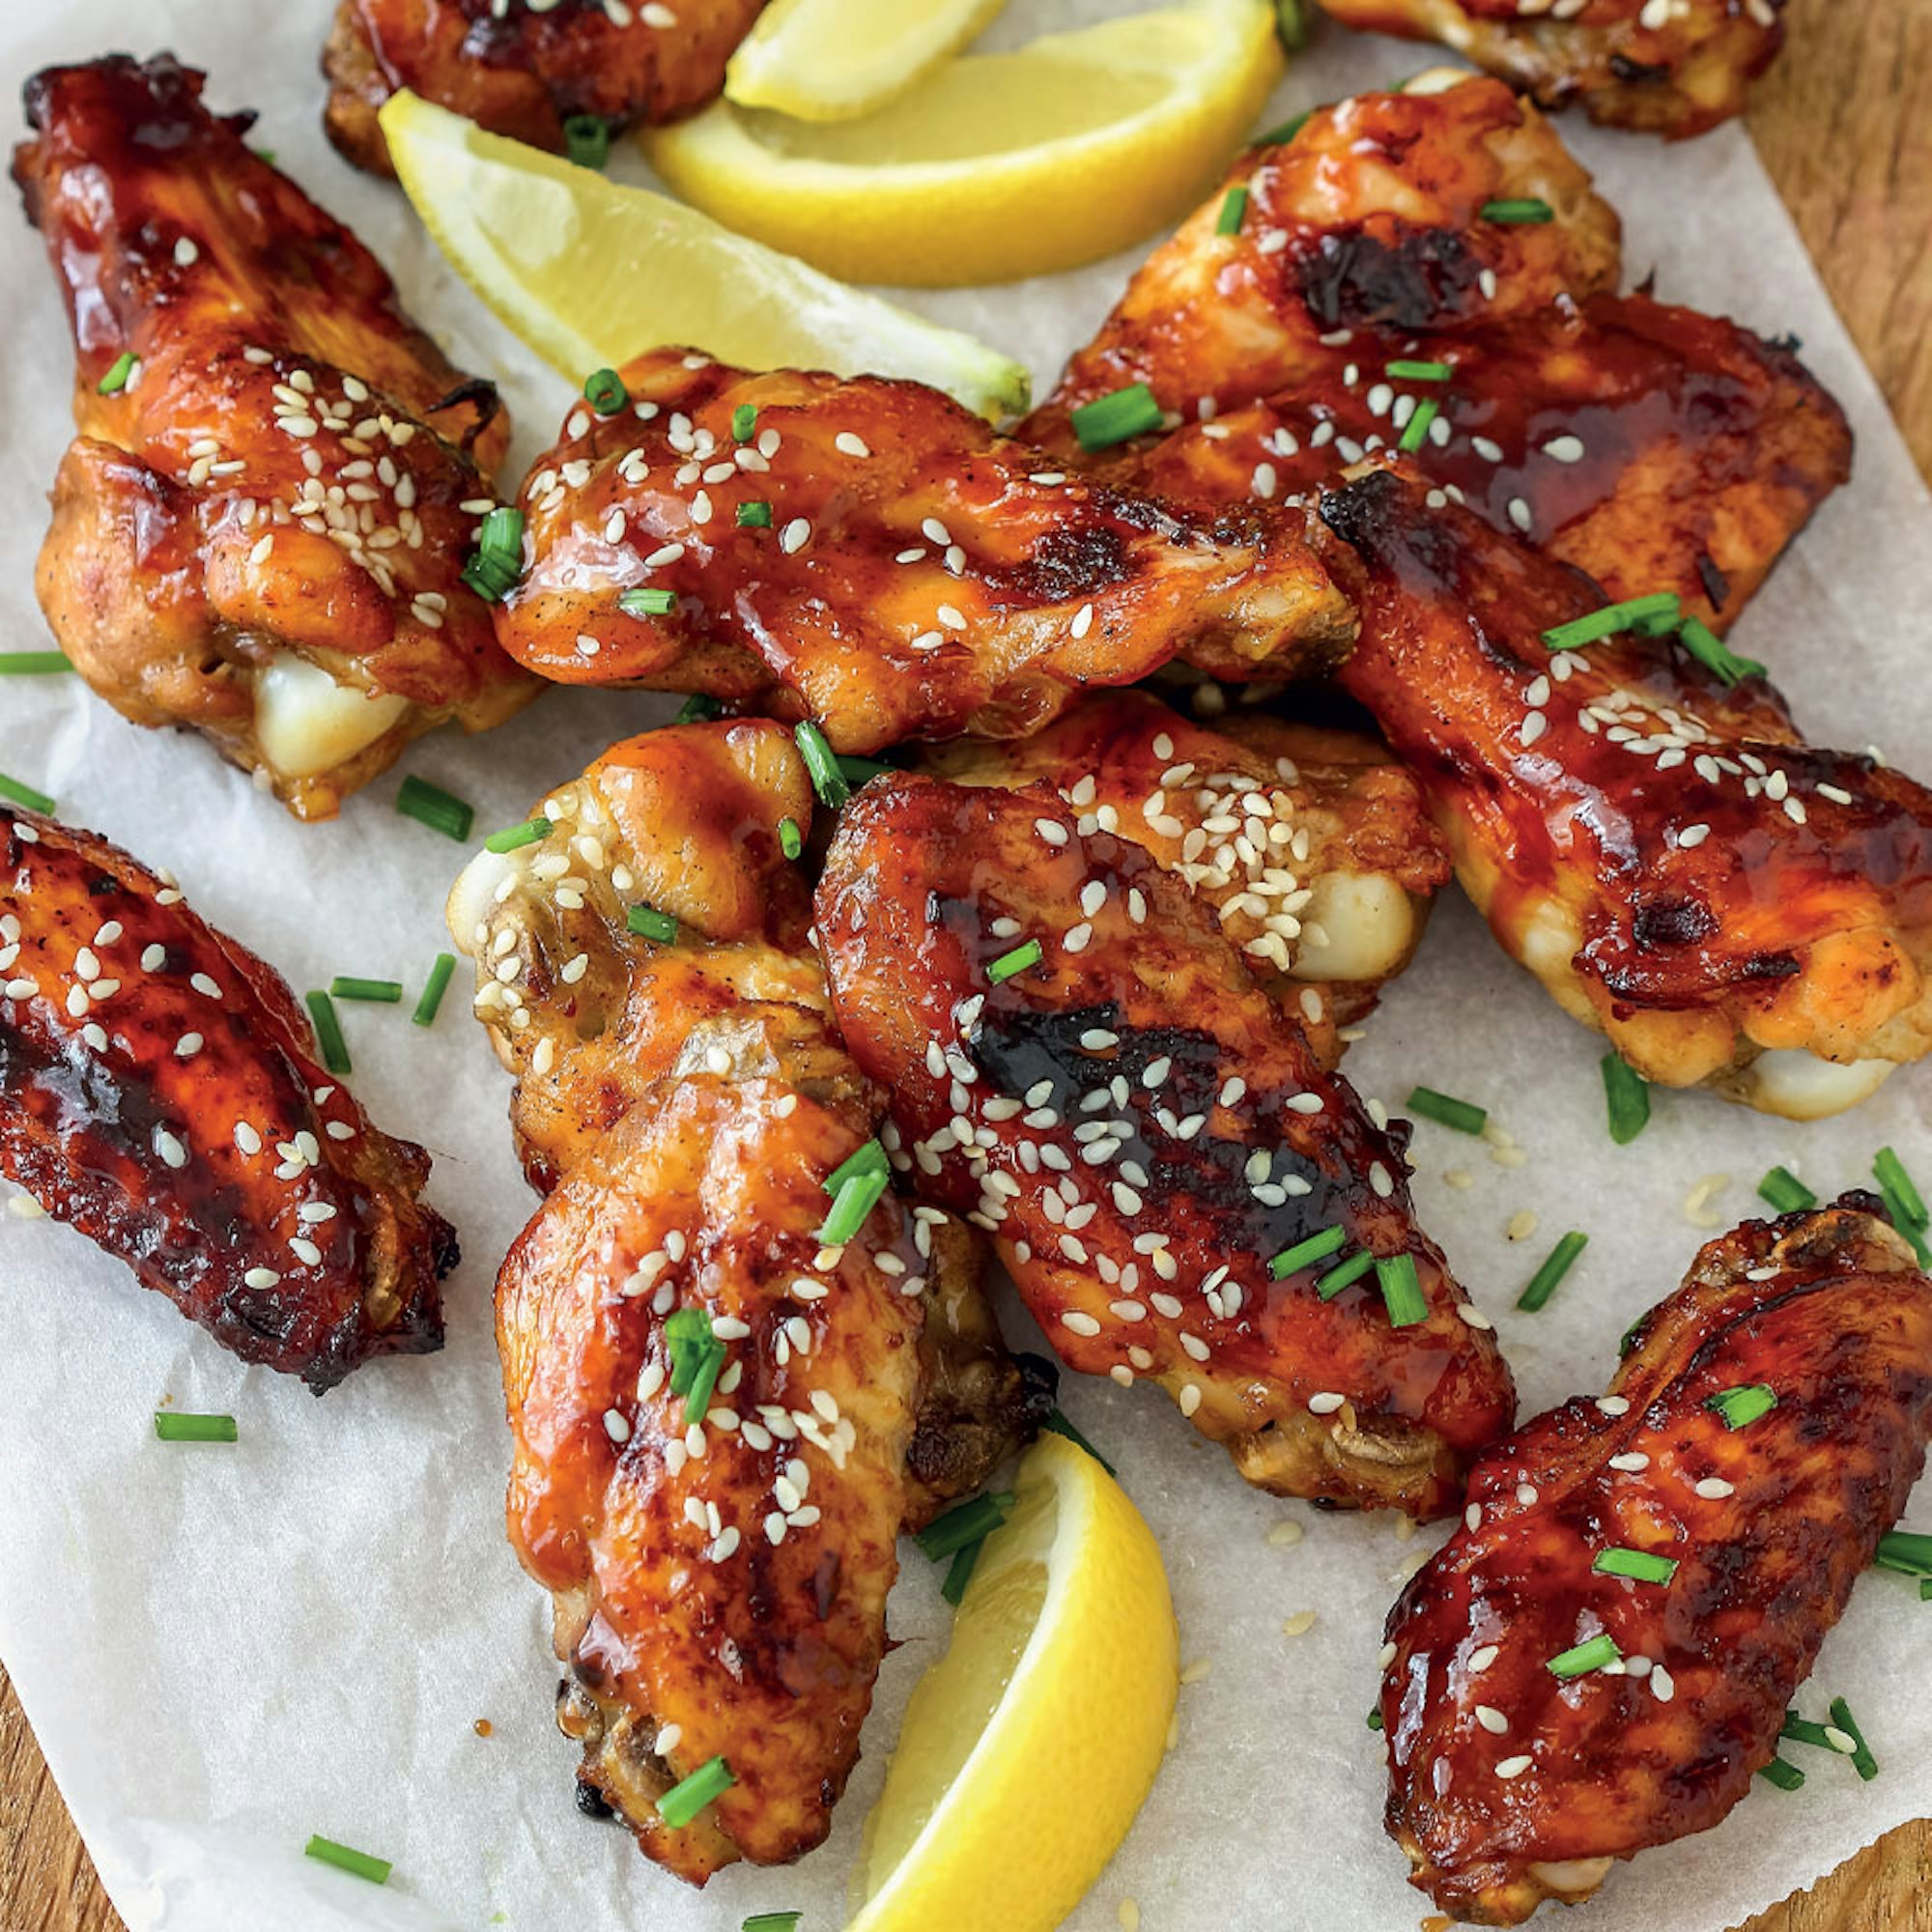 Air fryer Honey glazed Spicy Soy Chicken Wings recipe. Baccarat The Healthy Fry Multi dual Zone 9L Air fryer.